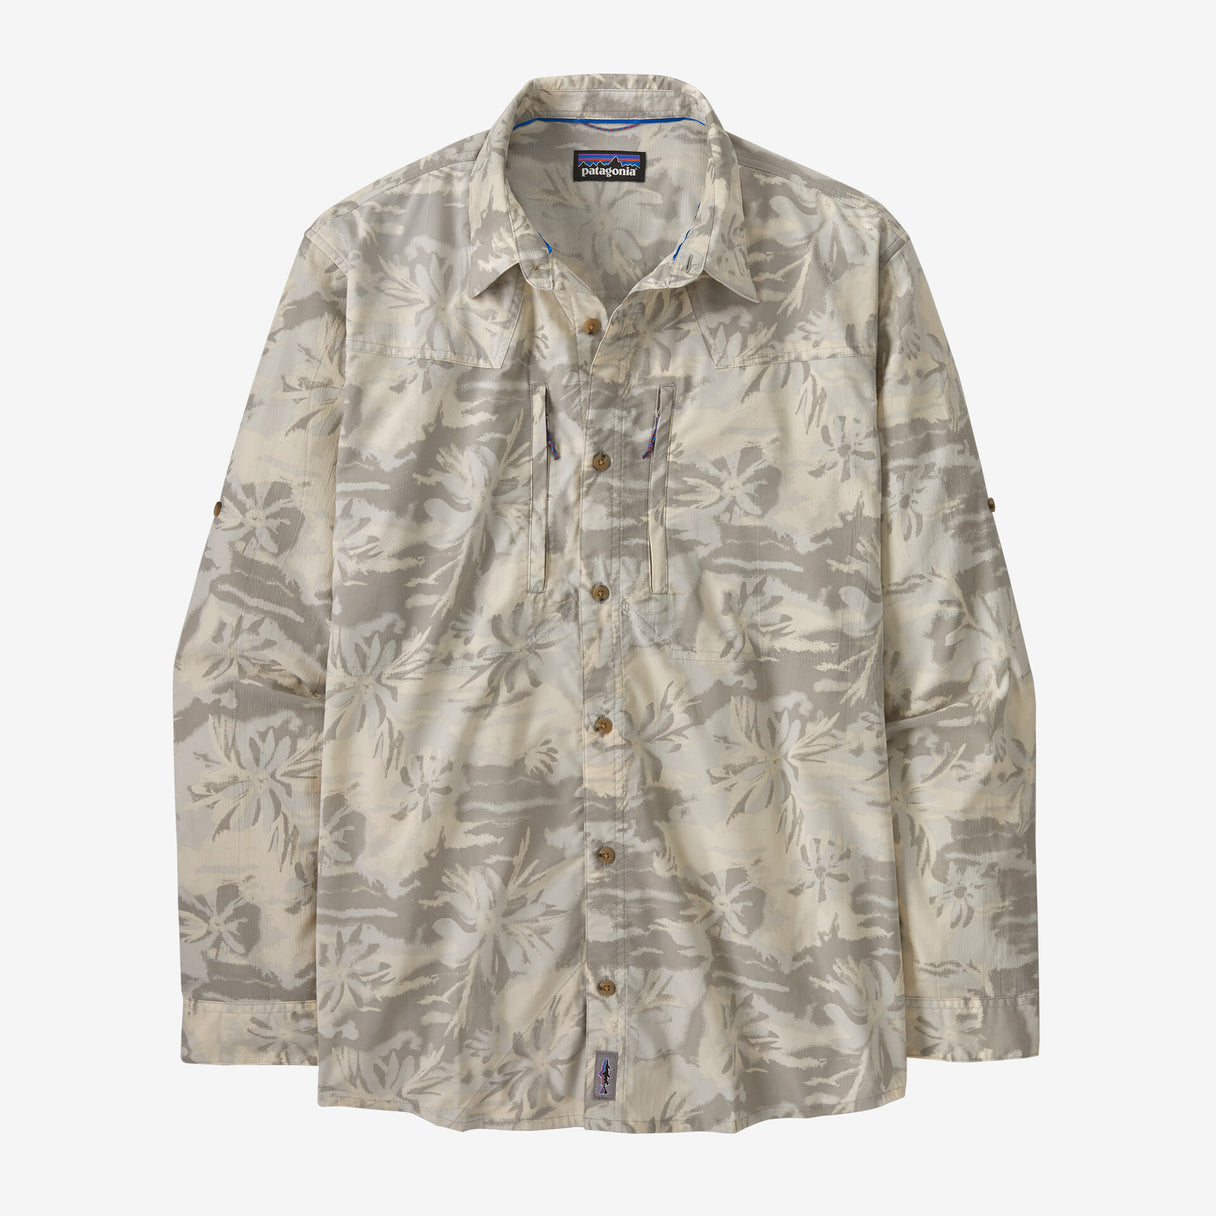 Patagonia Men's Sun Stretch Shirt - Cliffs and Waves: Natural M